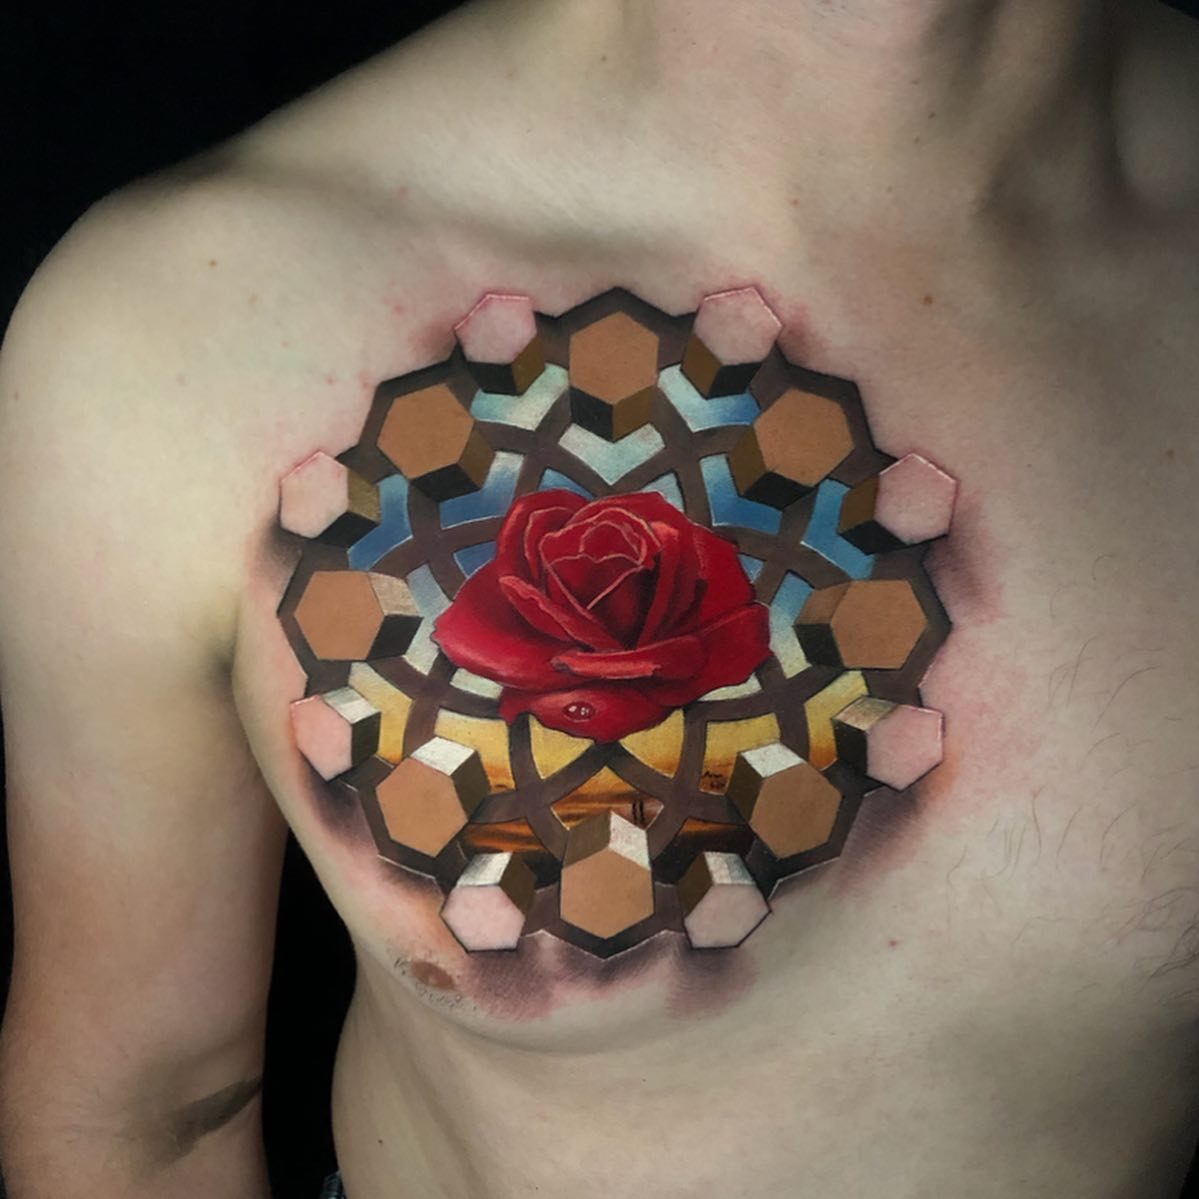 25 Salvador Dali-Inspired Tattoos That Turn the Surreal Into Reality | These tattoo designs inspired by Salvador Dali are out of this world.